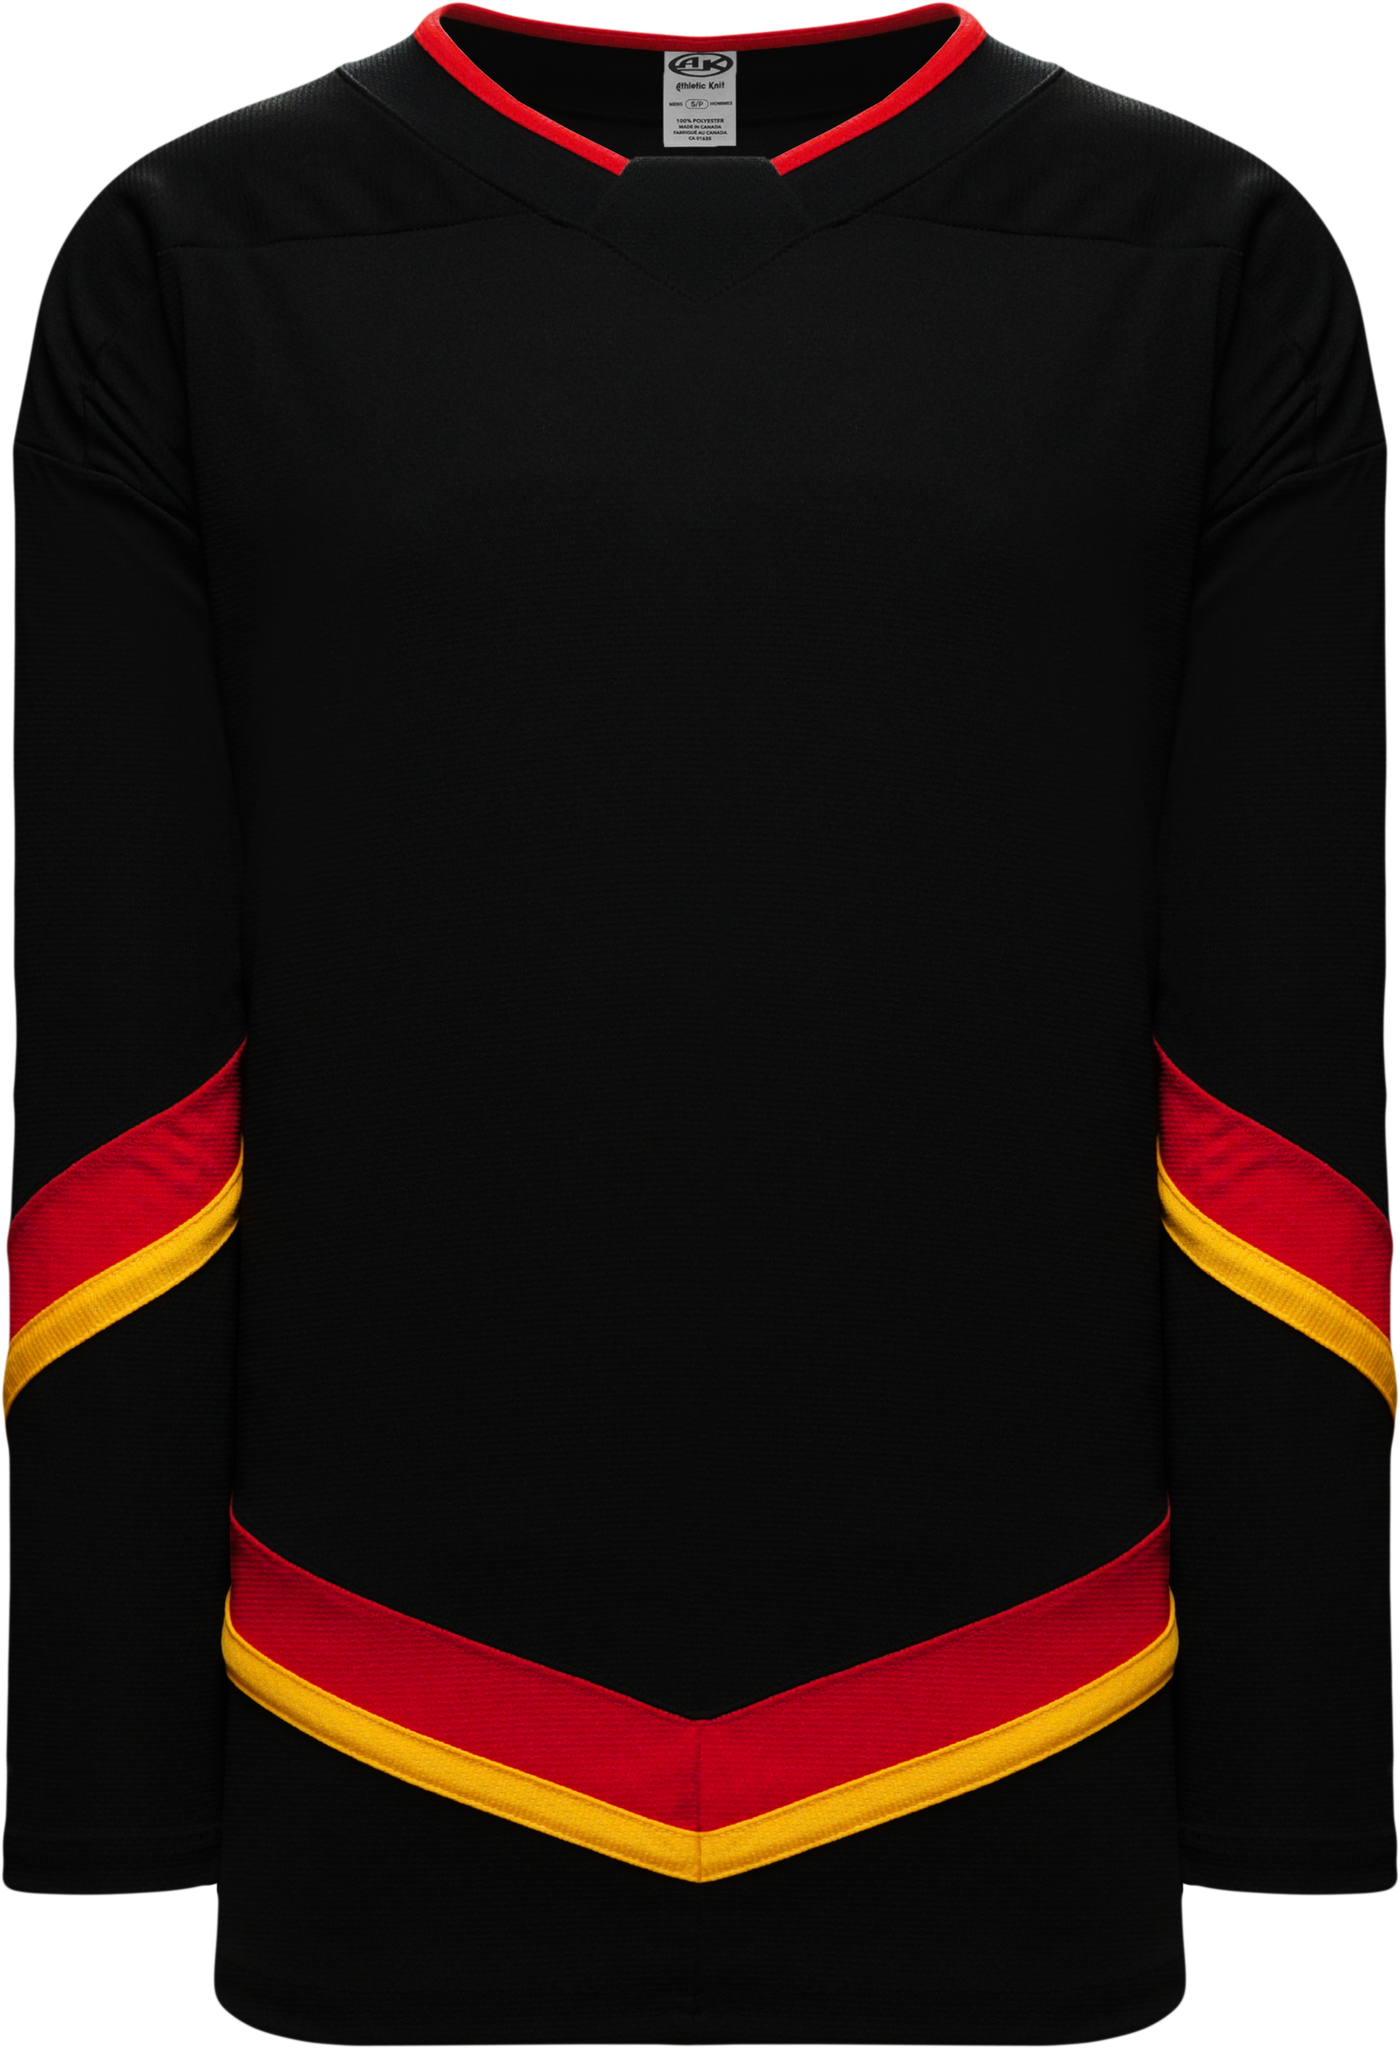 Calgary Flames Red Home Adult Size 42 (XXS) Adidas Jersey